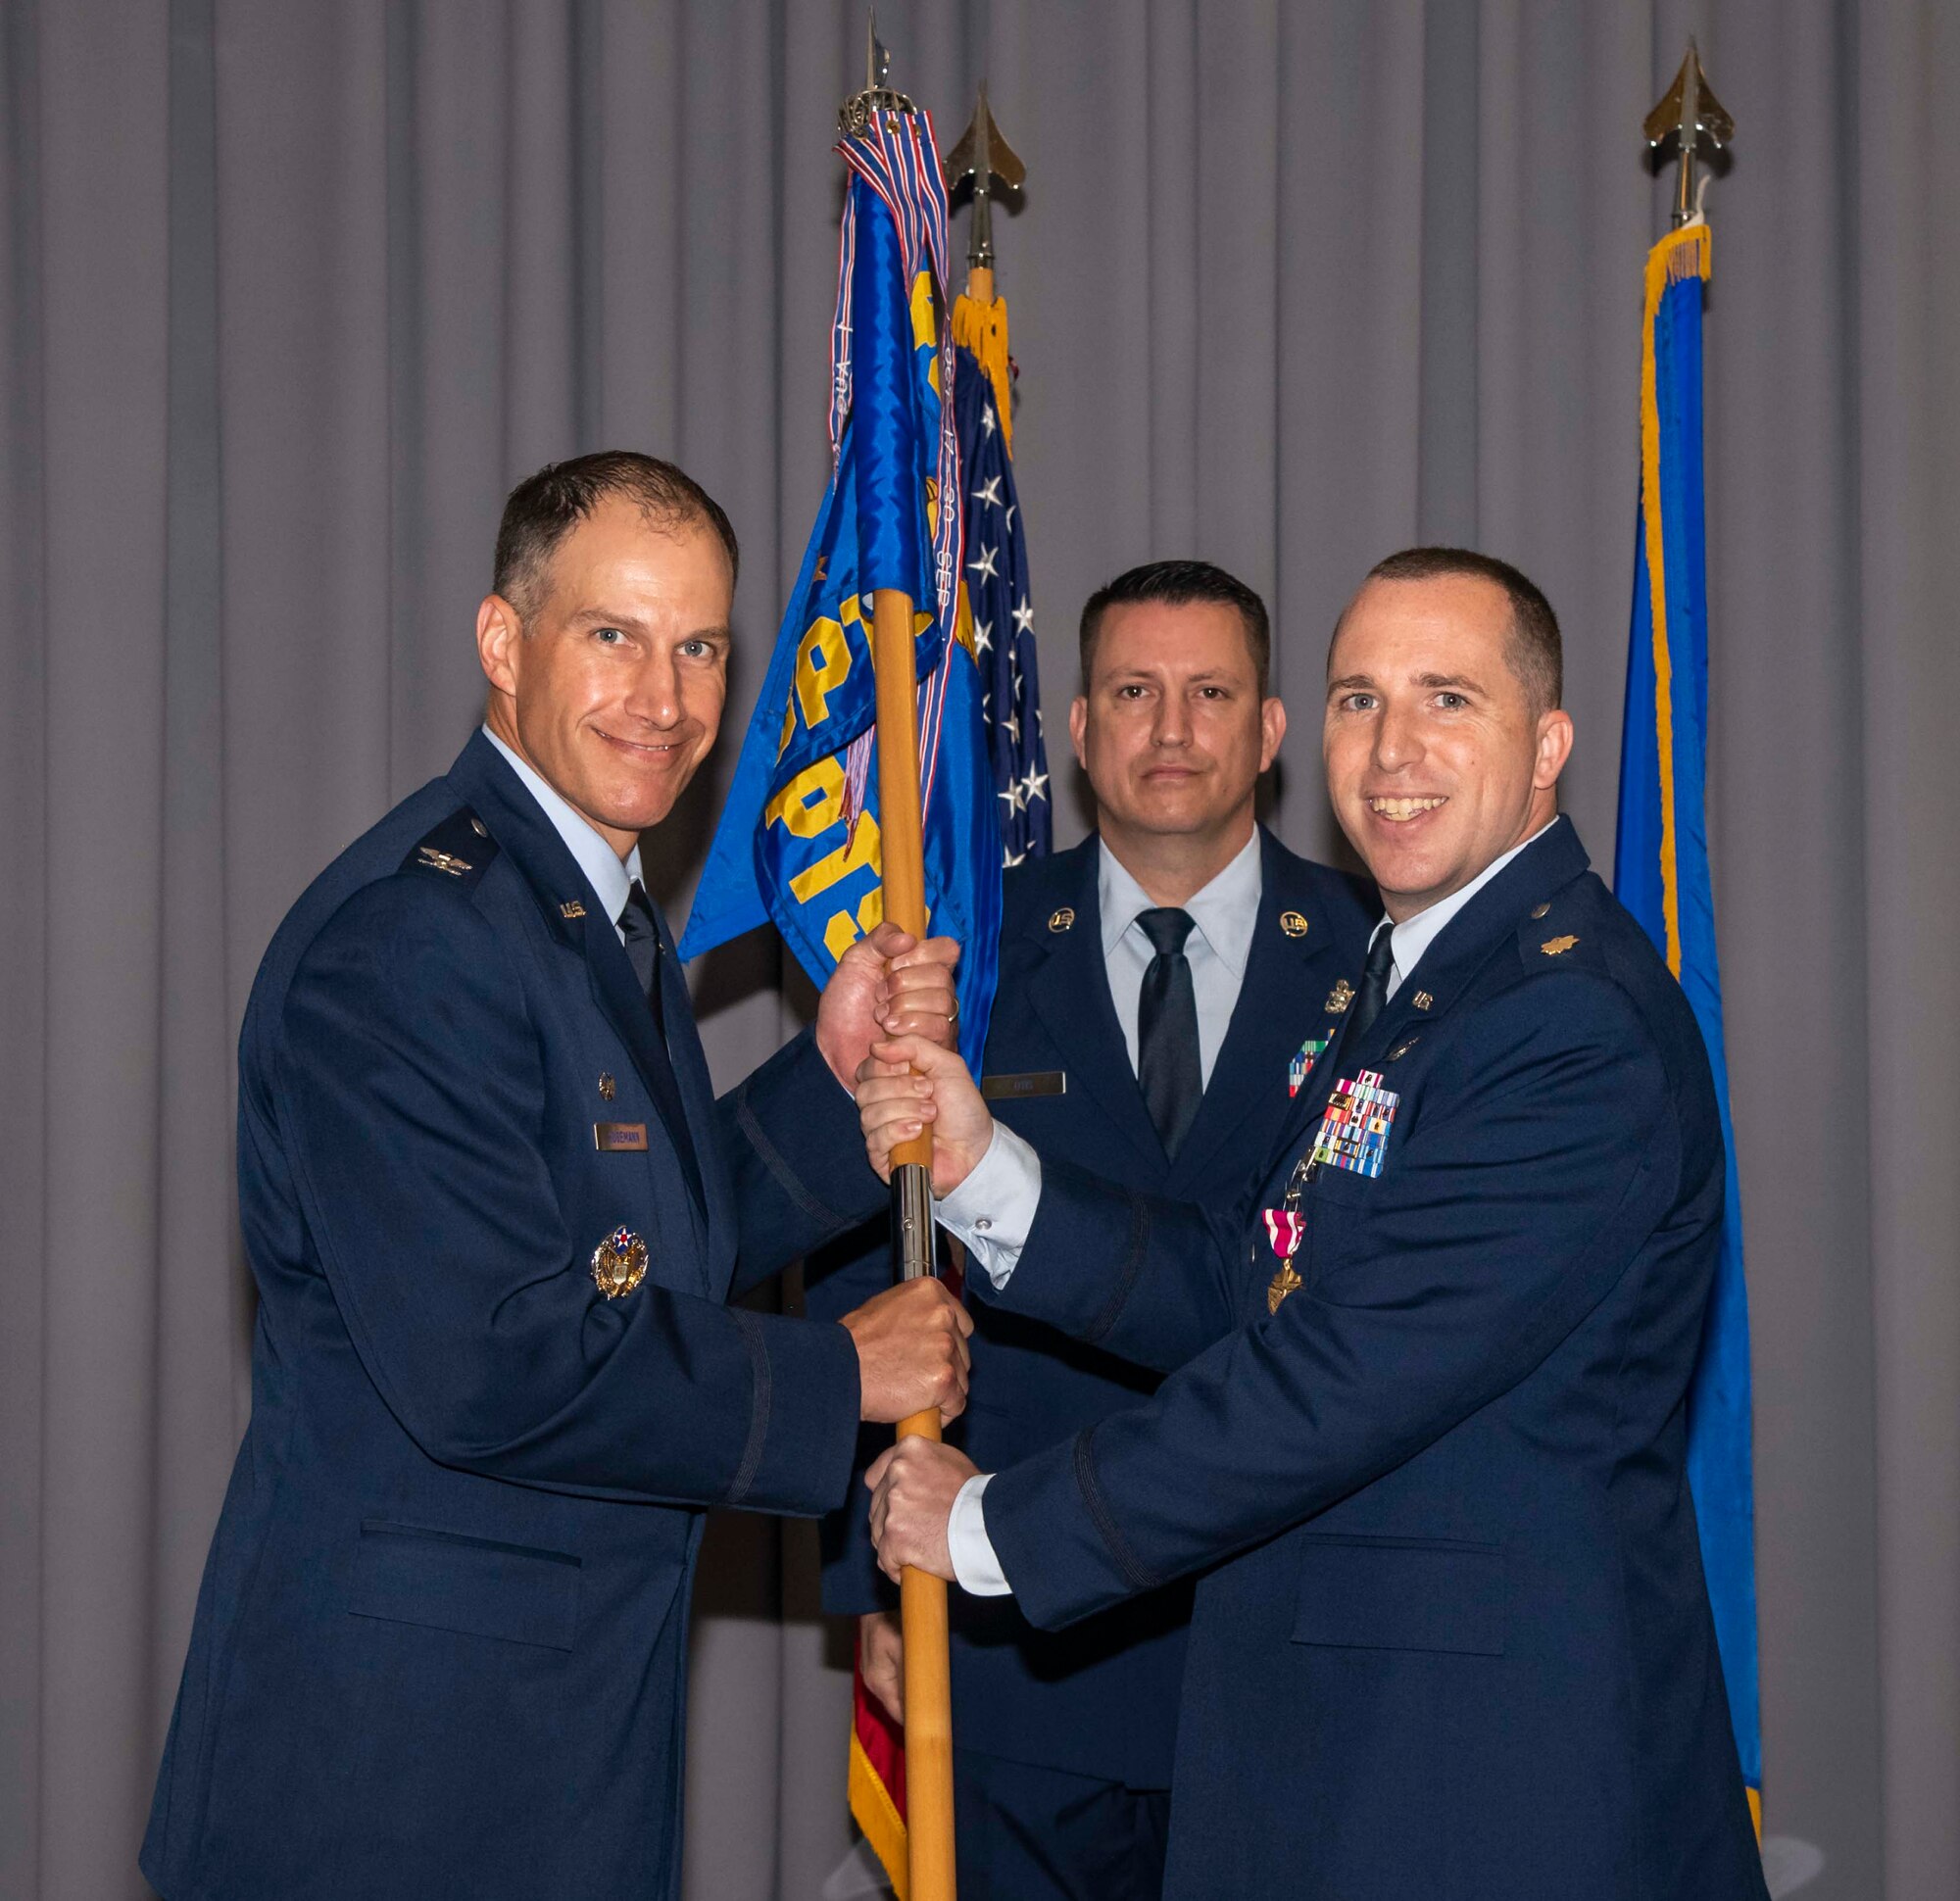 Maj. Kevin Byram, right, outgoing 436th Comptroller Squadron commander, passes the guidon to Col. Matt Husemann, left, 436th Airlift Wing commander, during a change of command ceremony on Dover Air Force Base, Delaware, June 28, 2021. The ceremony saw Byram relinquish command to Lt. Col. Gretchen Lewis. (U.S. Air Force photo by Airman 1st Class Stephani Barge)